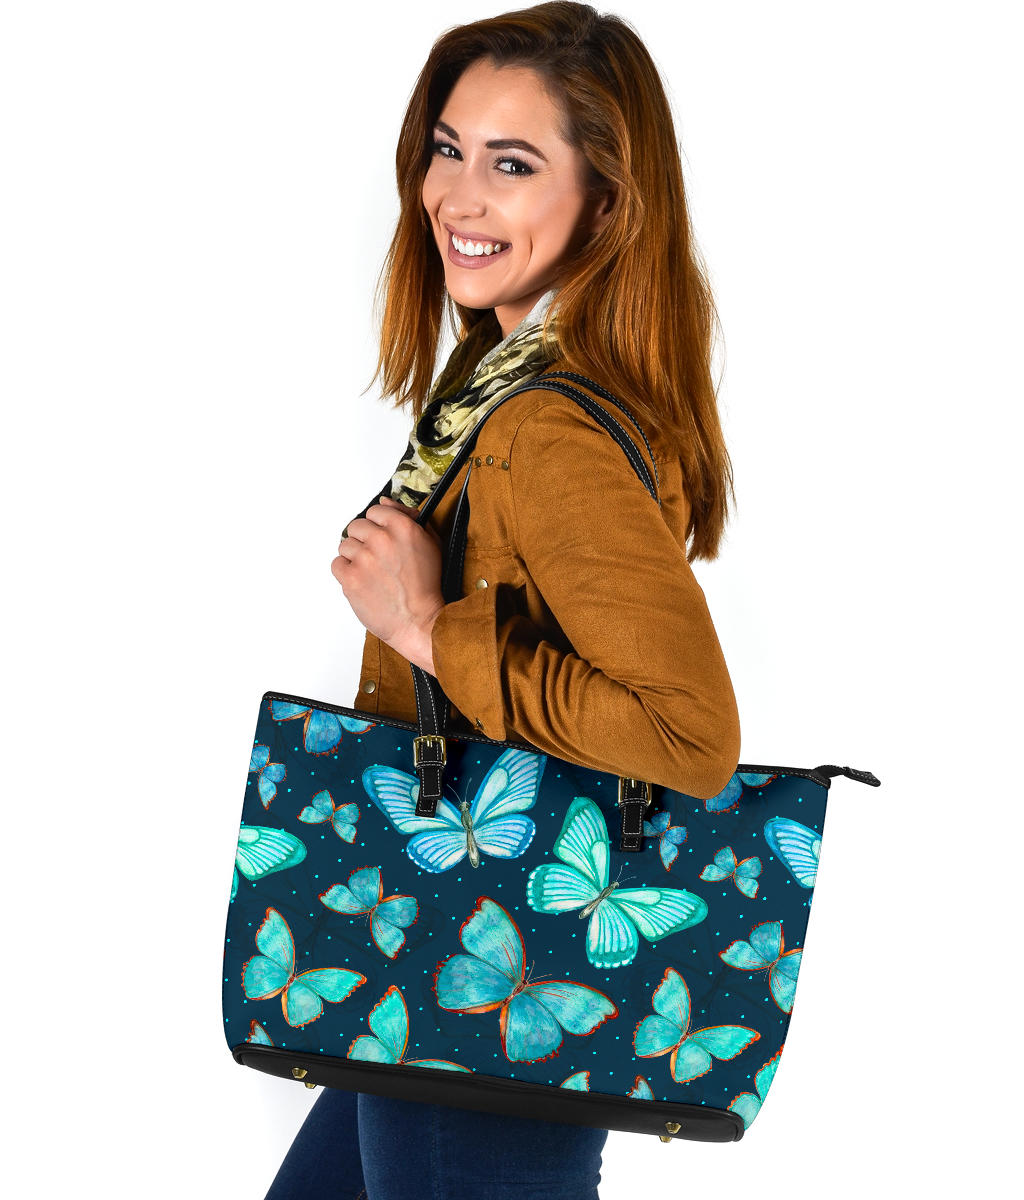 Spiritual Butterfly Premium Faux Leather Bag